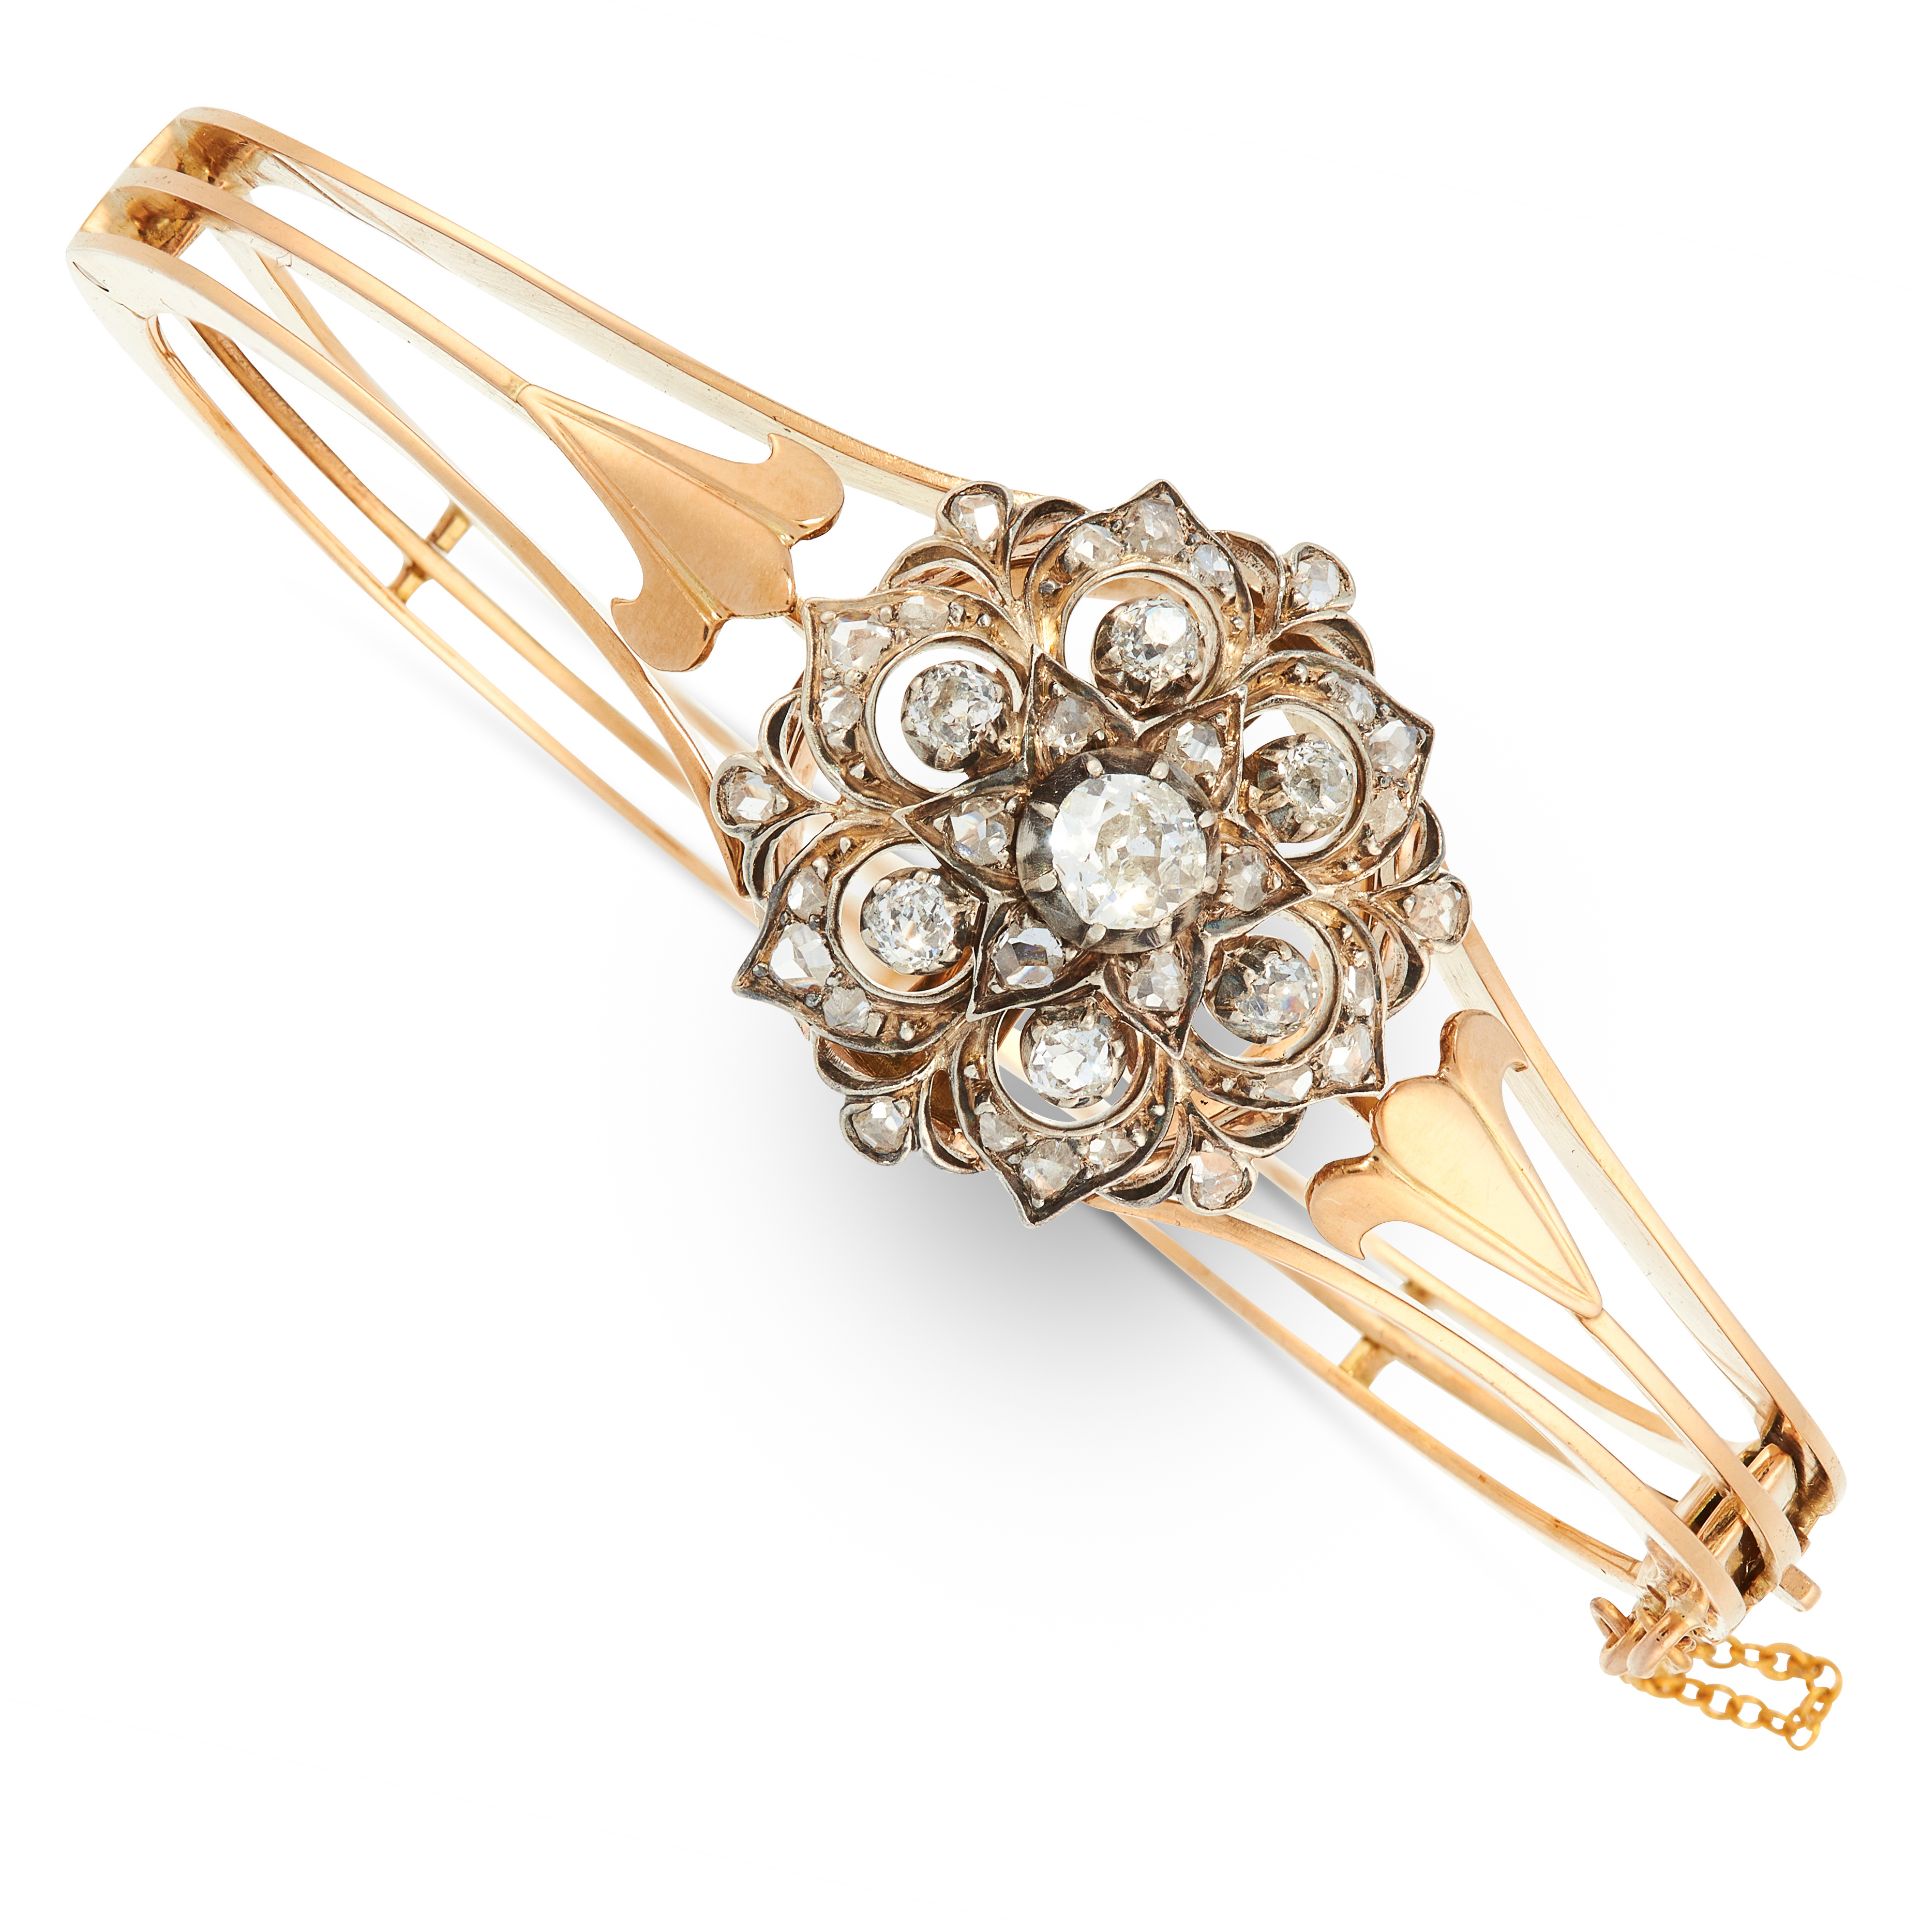 ANTIQUE DIAMOND BANGLE, LATE 19TH CENTURY in high carat yellow gold and silver, the face designed as